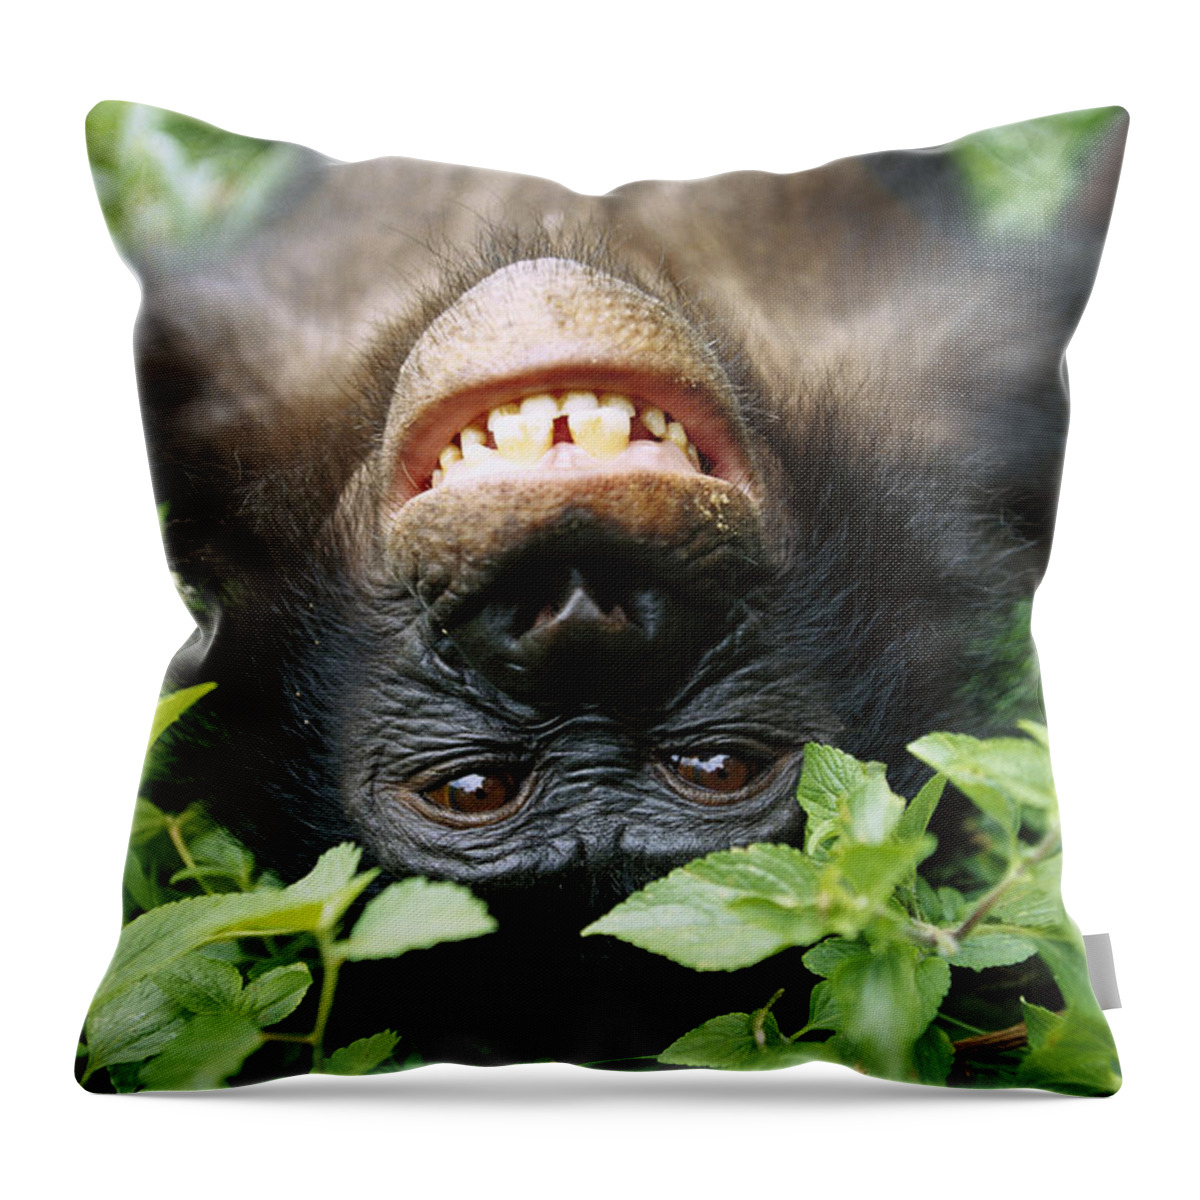 #faatoppicks Throw Pillow featuring the photograph Bonobo Smiling by Cyril Ruoso